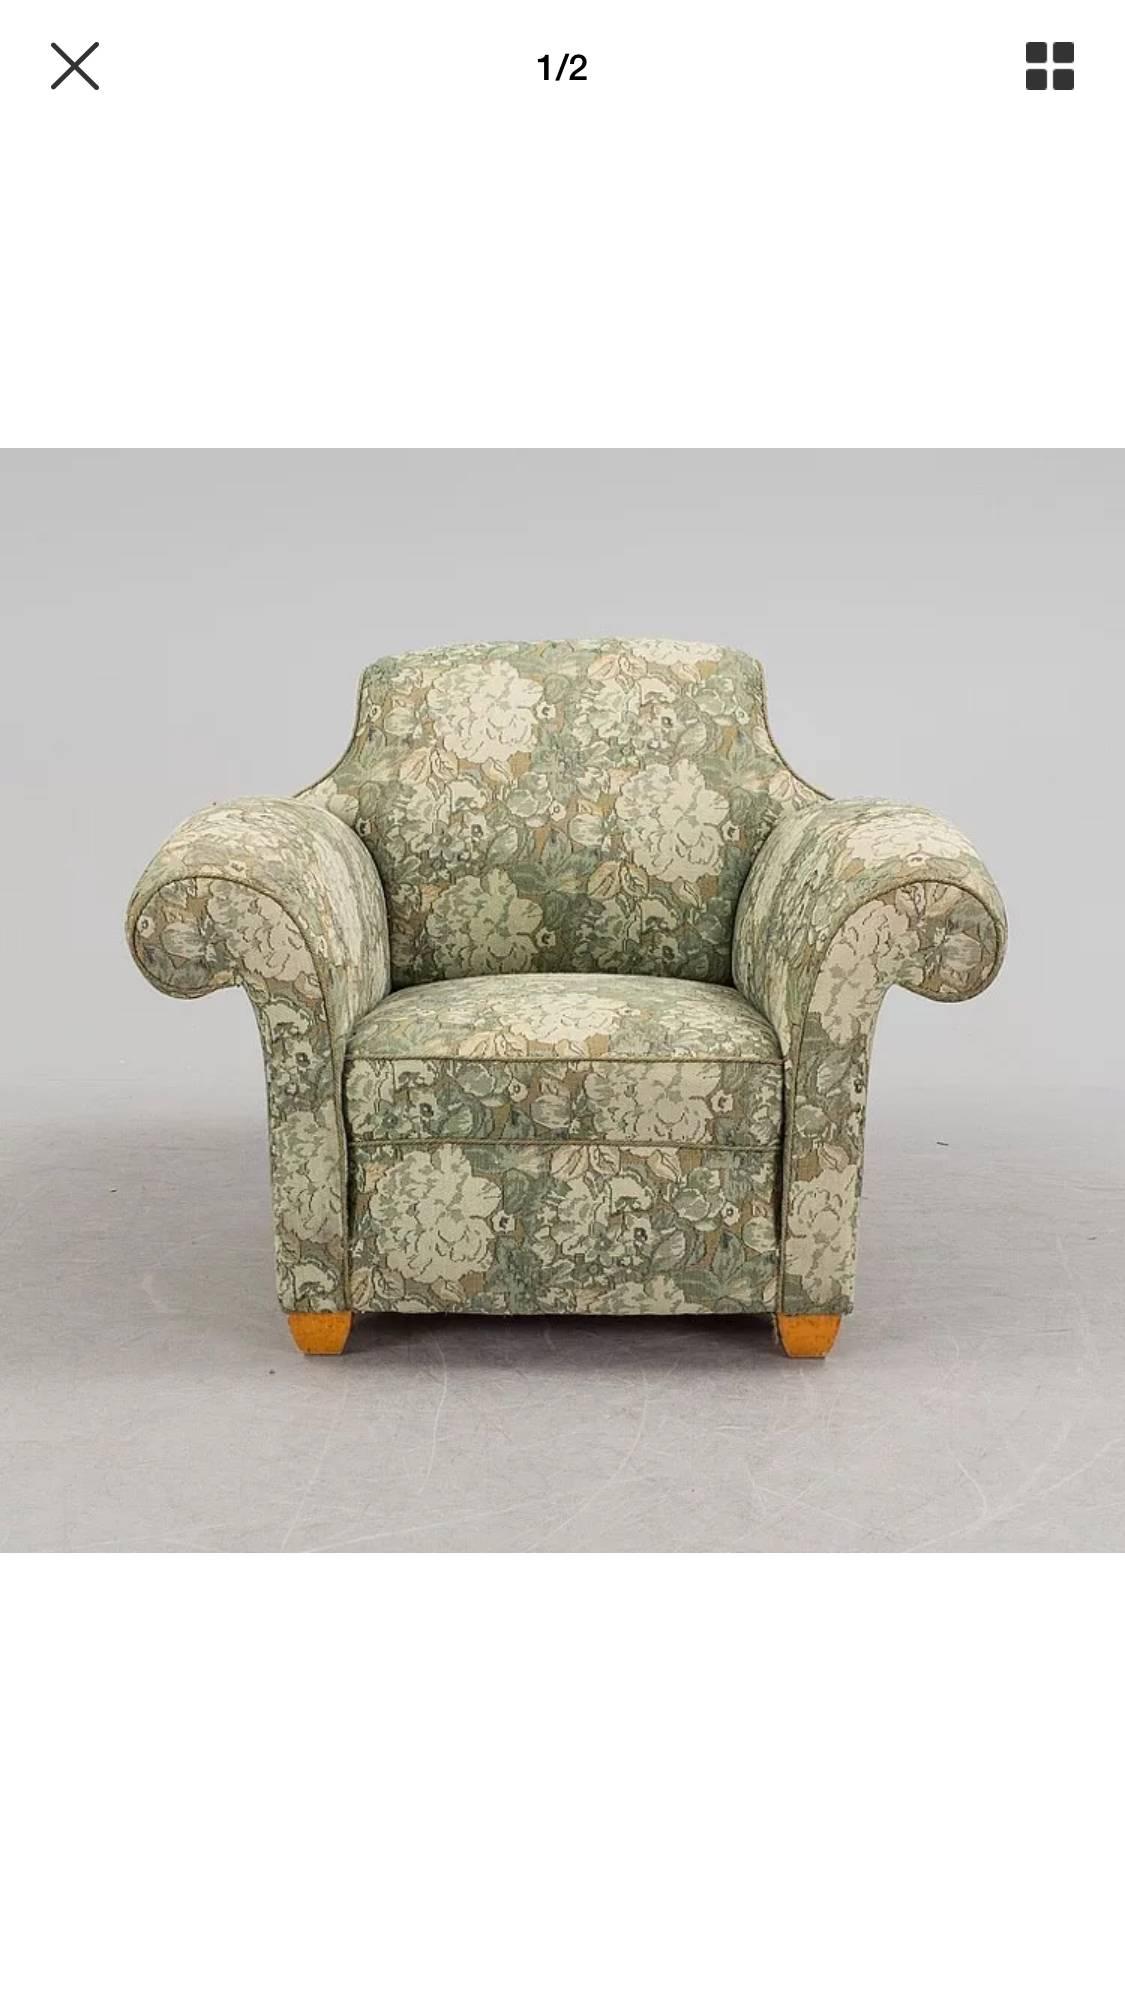 French Large Baroque Style Armchair, Art Deco Period, circa 1940-1950 For Sale